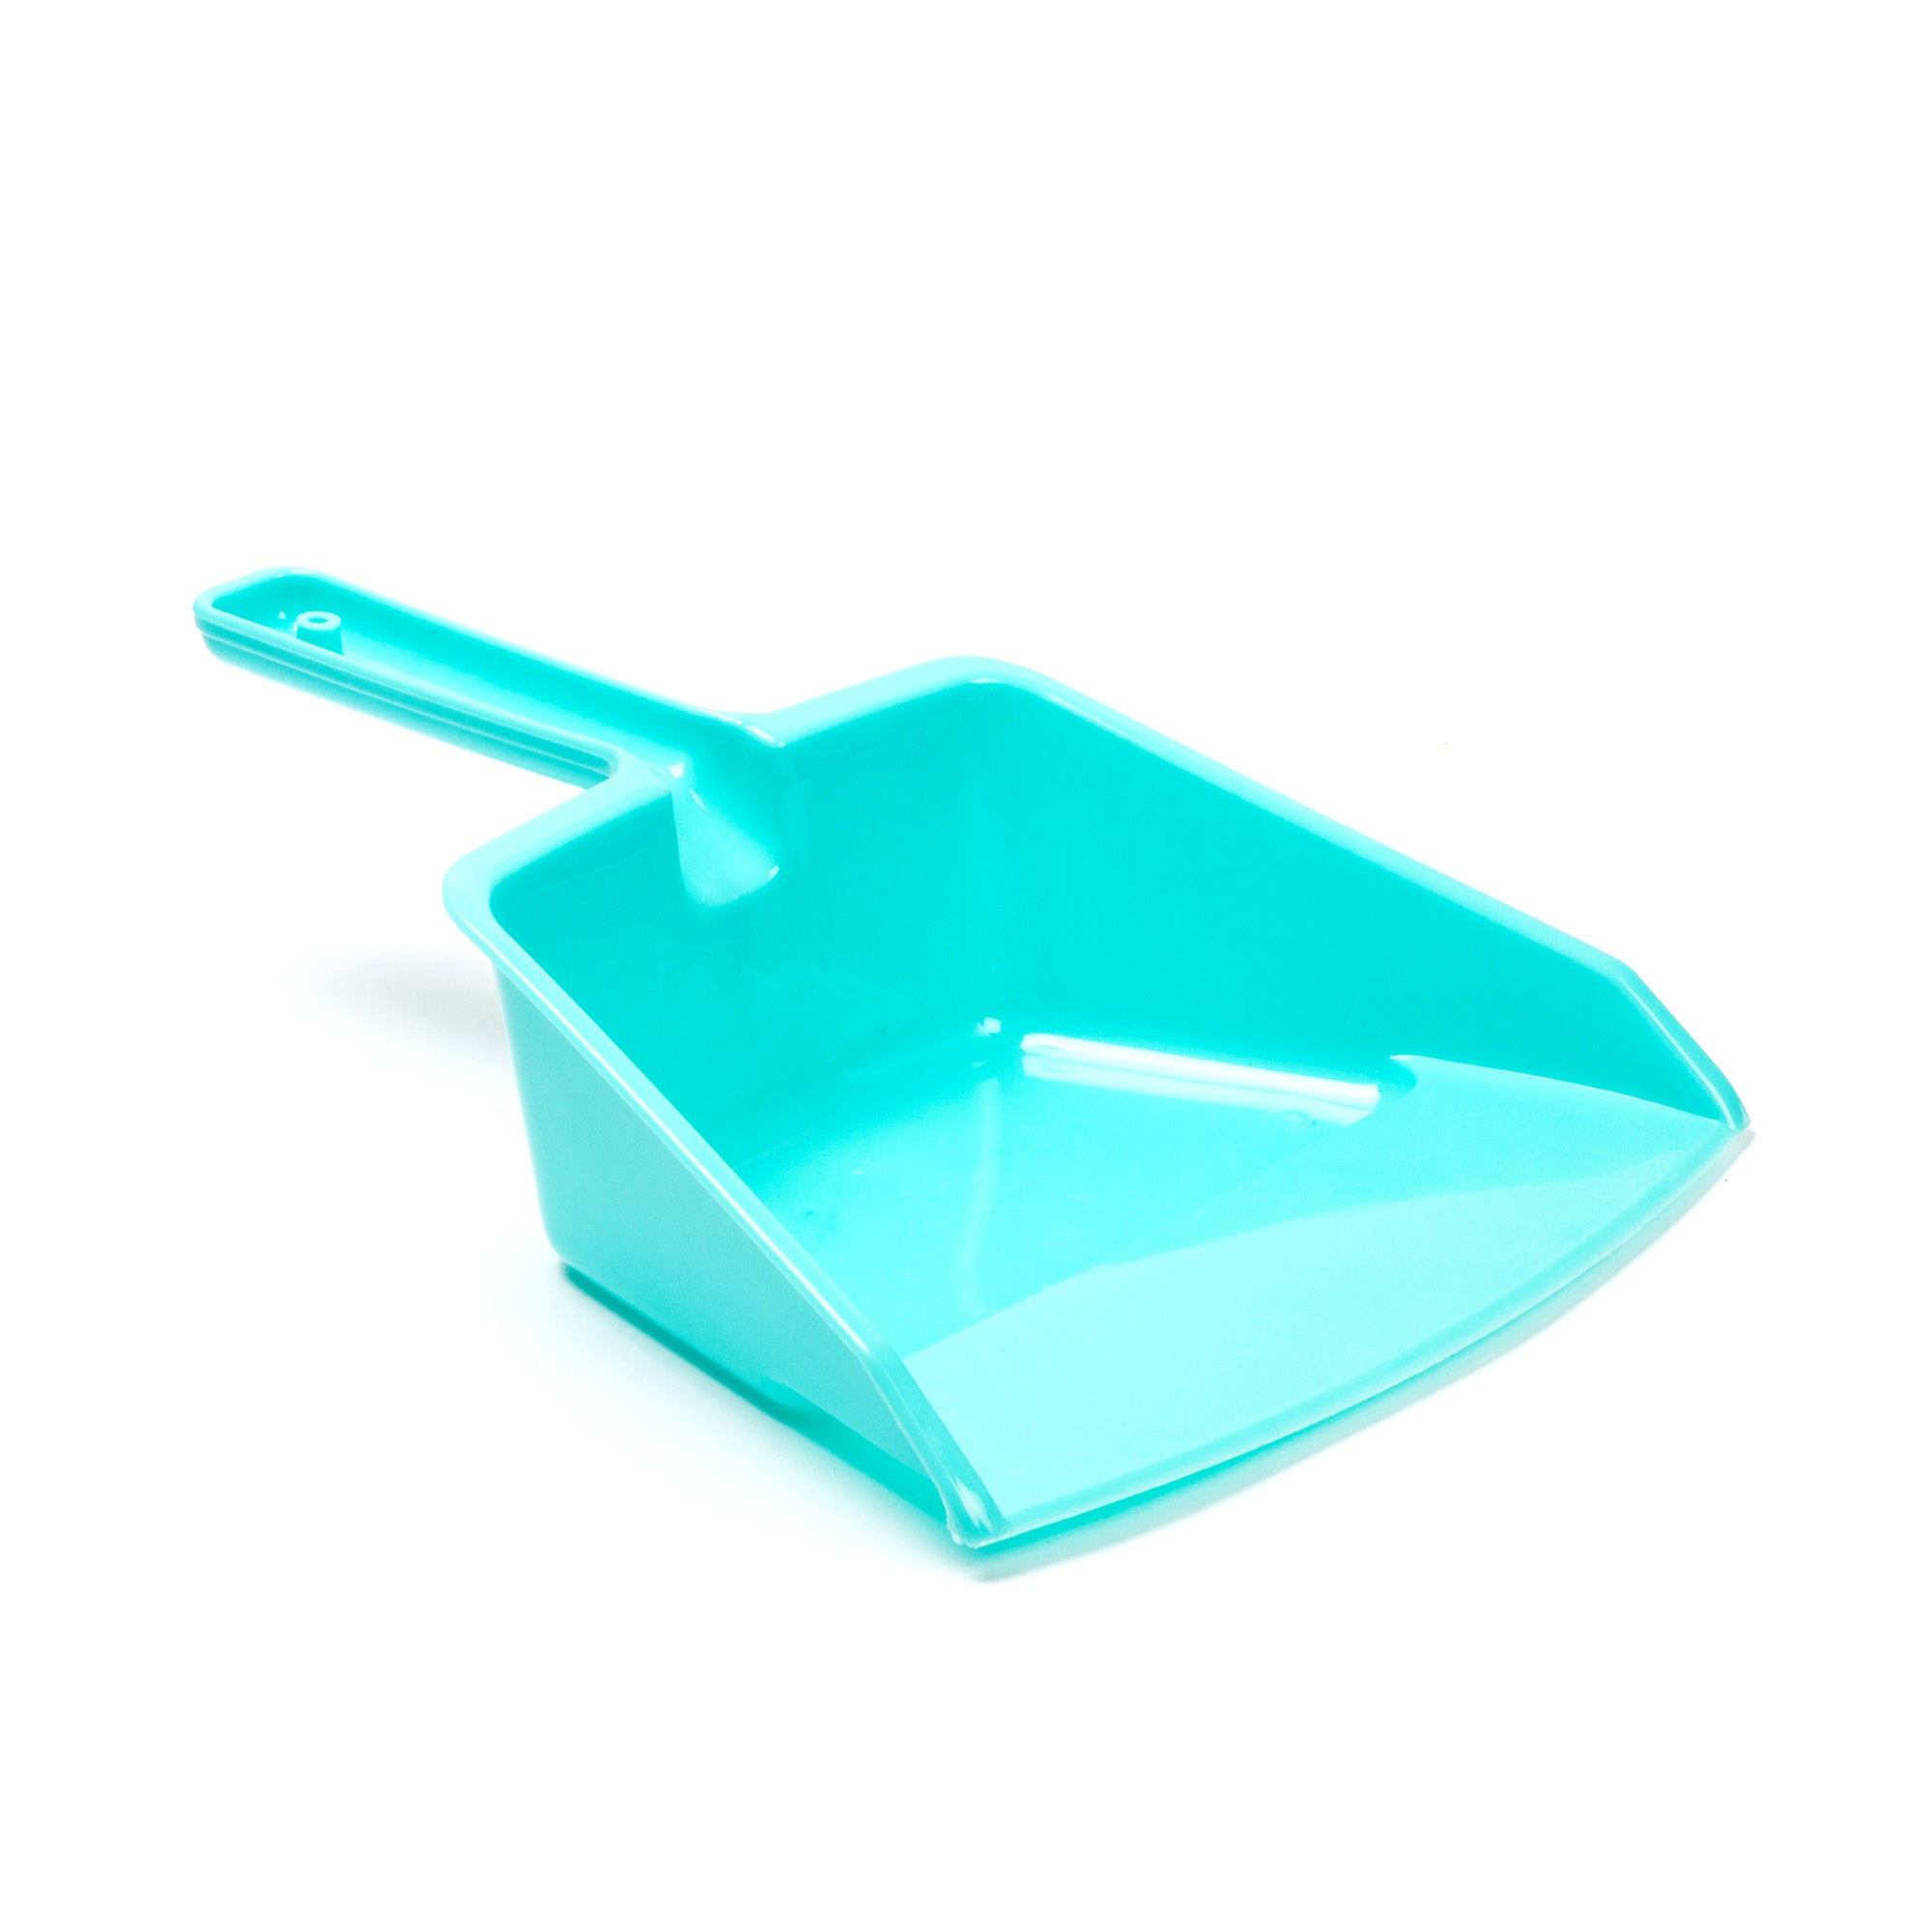 Sweepy Heavy duty Plastic Dust Collecting Pan